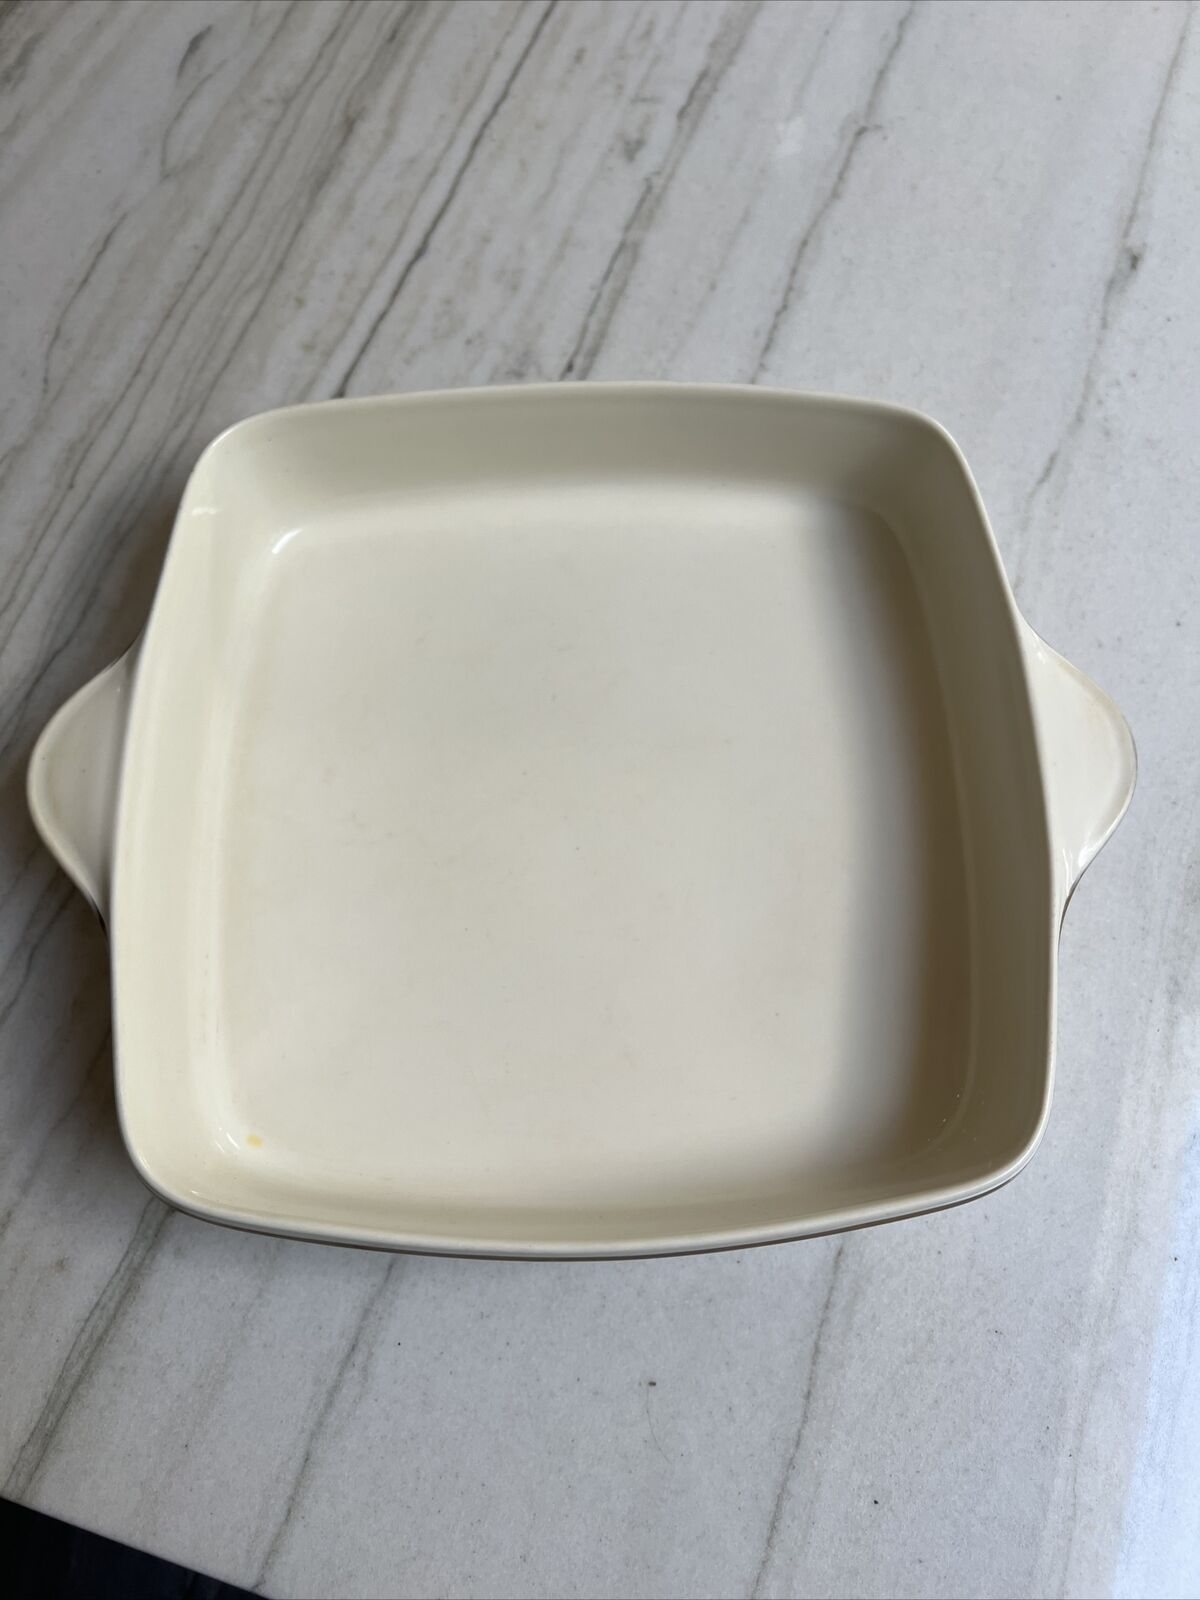 Lenox Eternal Square Oven To Table Bakeware